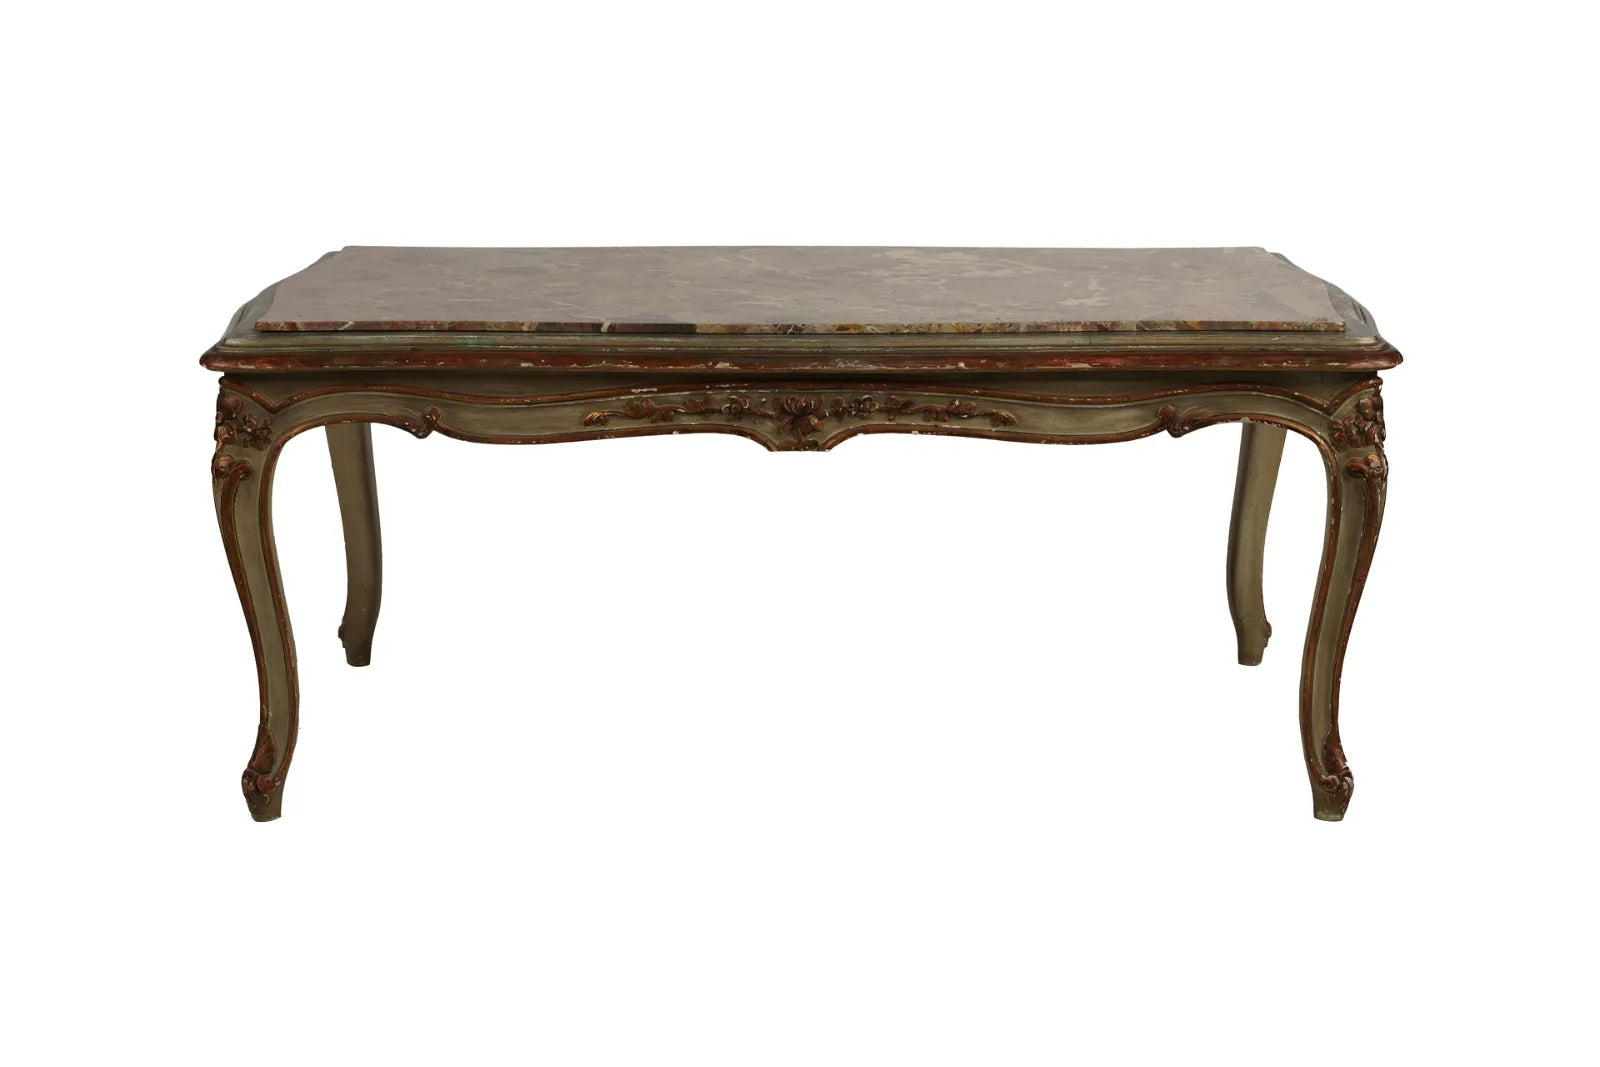 AF1-041: Early 20th Century Rococo Style & Gilt Coffee Table w/ Marble Top